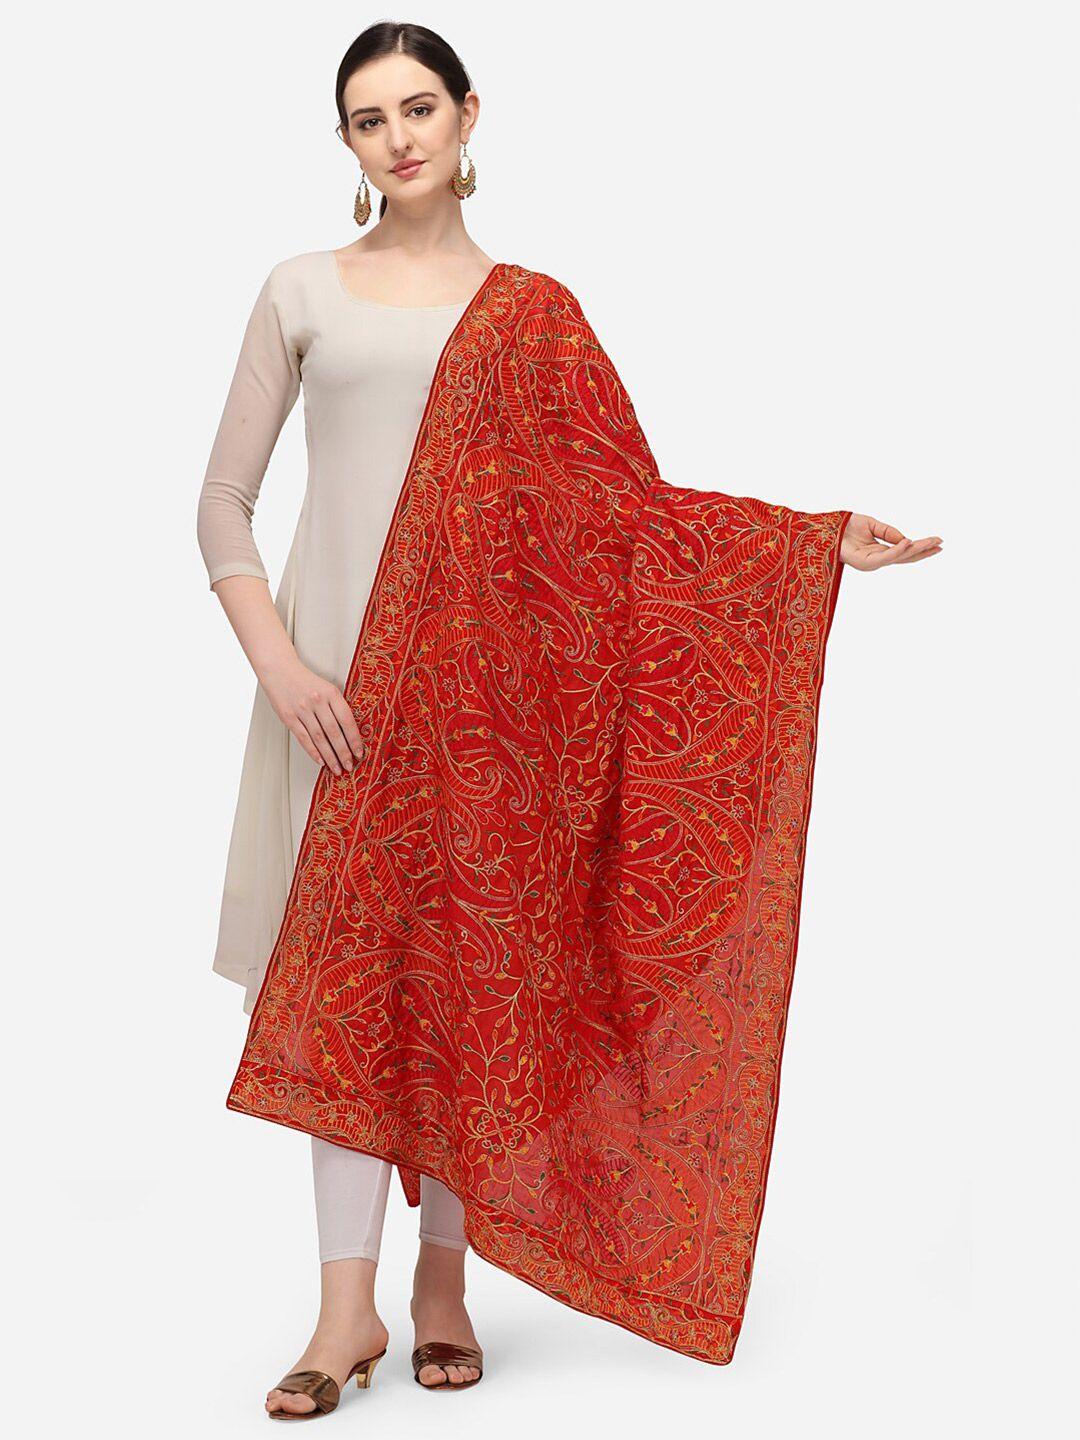 vastranand-red-&-gold-toned-ethnic-motifs-embroidered-dupatta